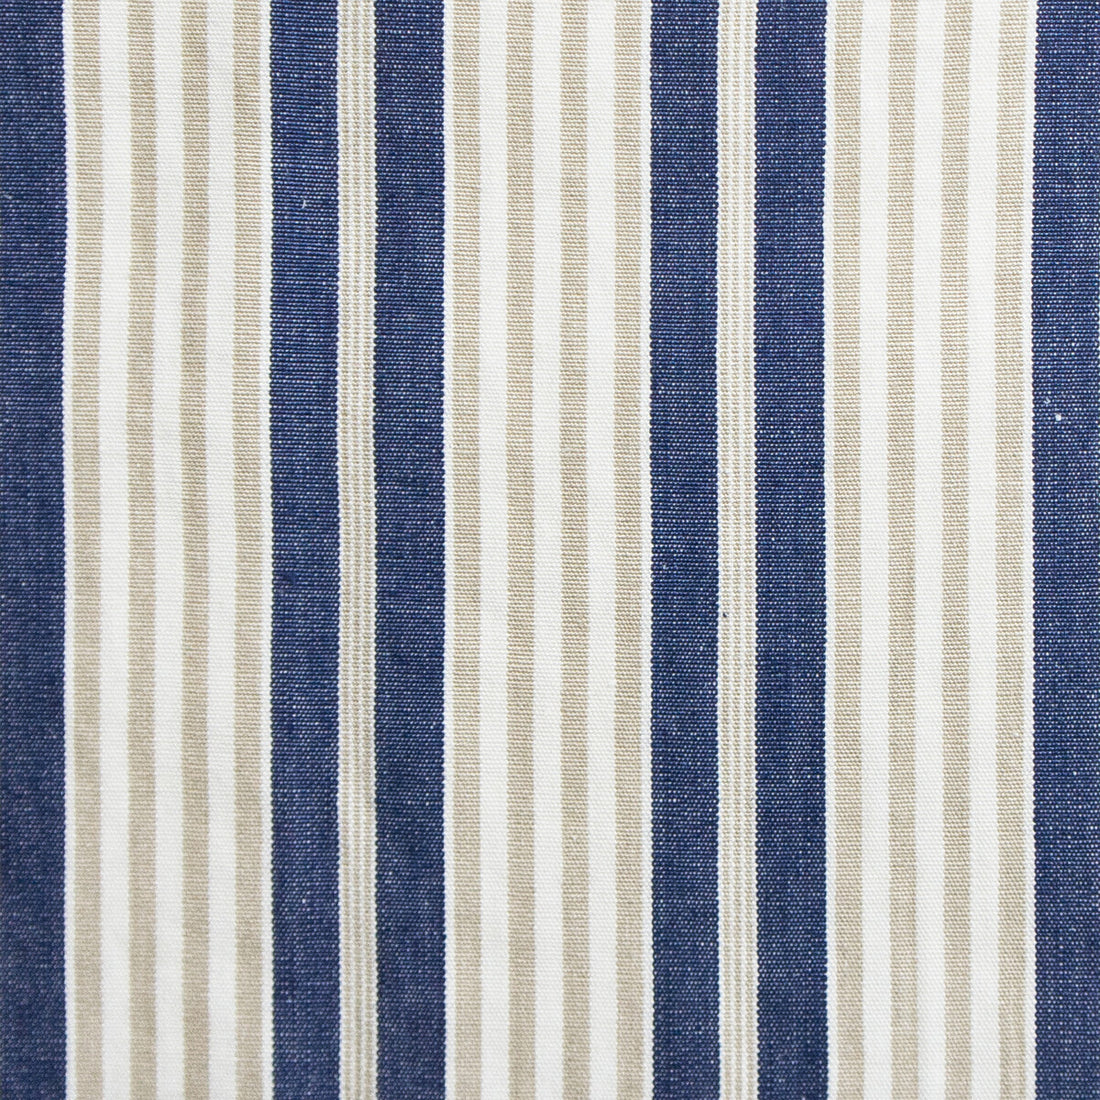 Hamptons fabric in azul/gris color - pattern GDT5561.003.0 - by Gaston y Daniela in the Gaston Luis Bustamante collection